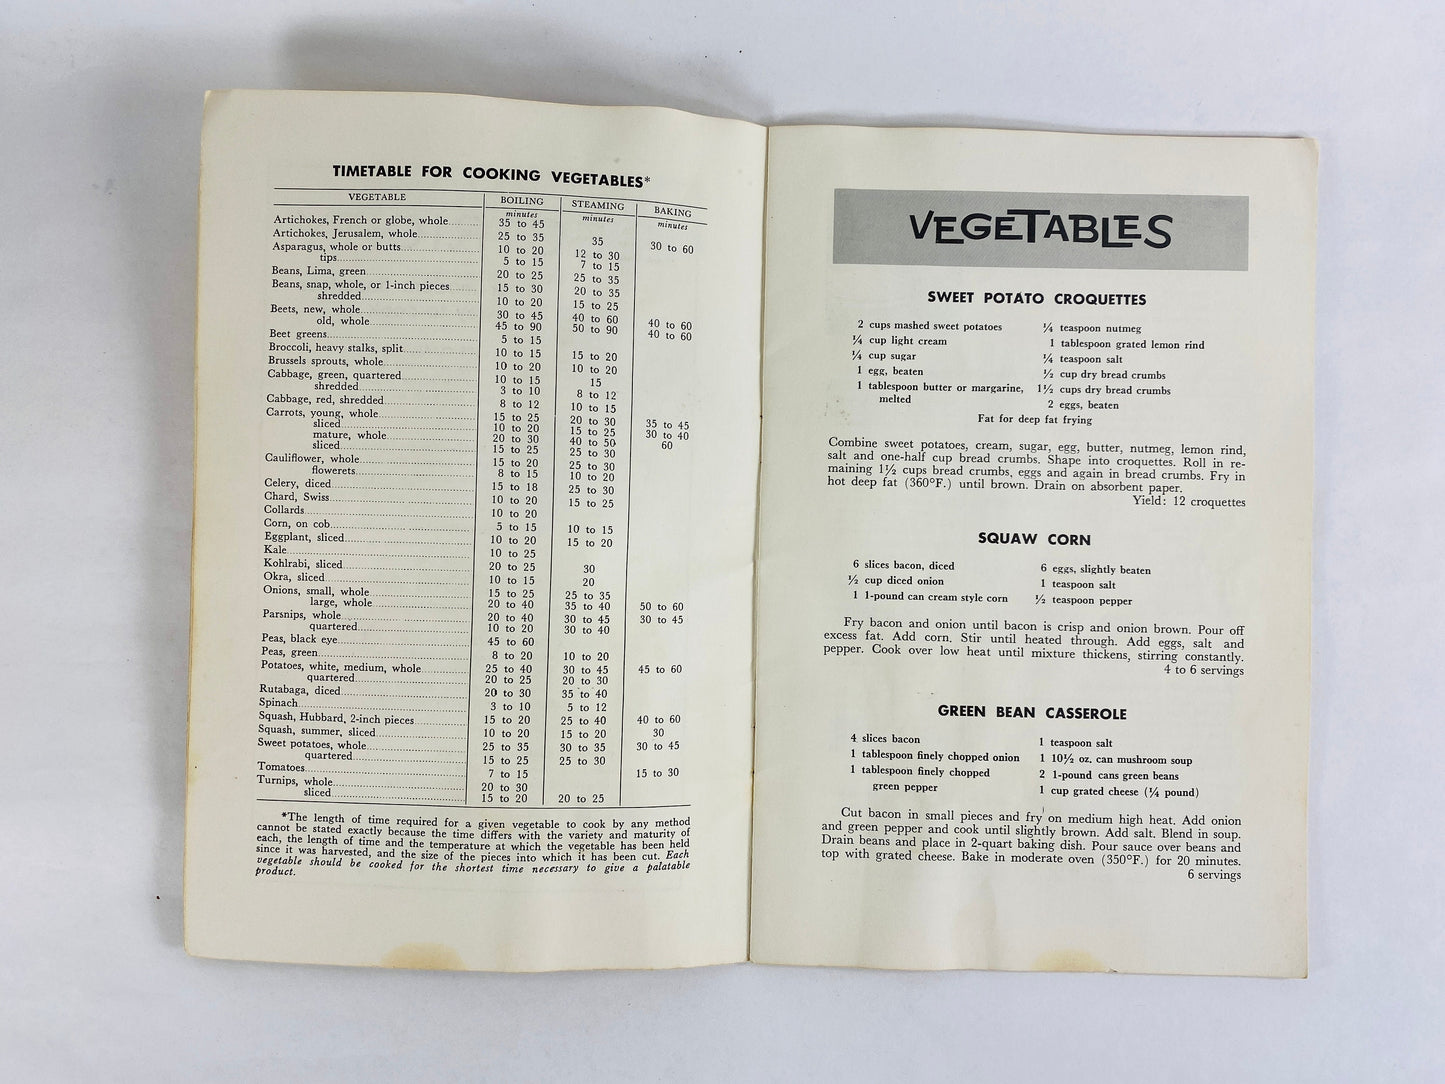 Recipes of the Southwest vintage Texas cookbook booklet. Chili con queso refridgerator salad guacamole, chicken loaf, corn meal mush, tamale